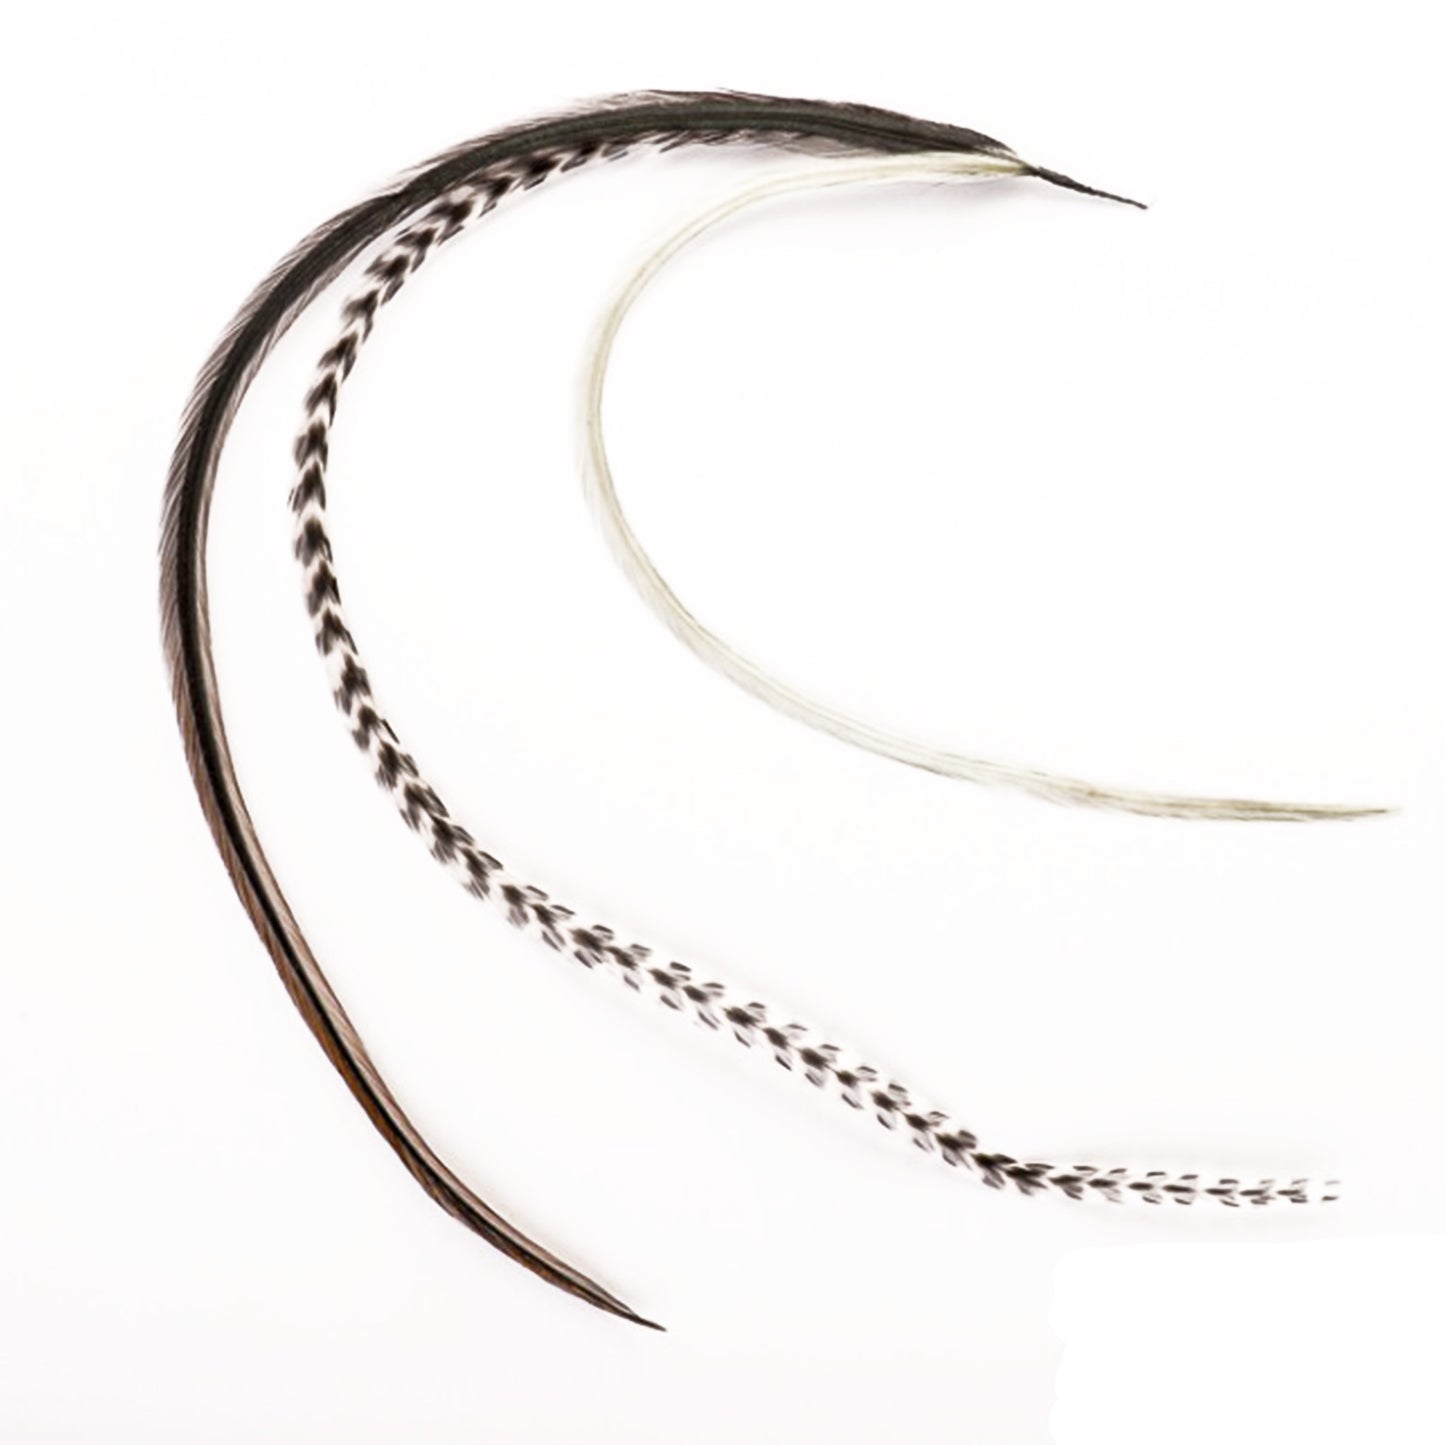 Feather extensions - 3 feathers - Wolf tail